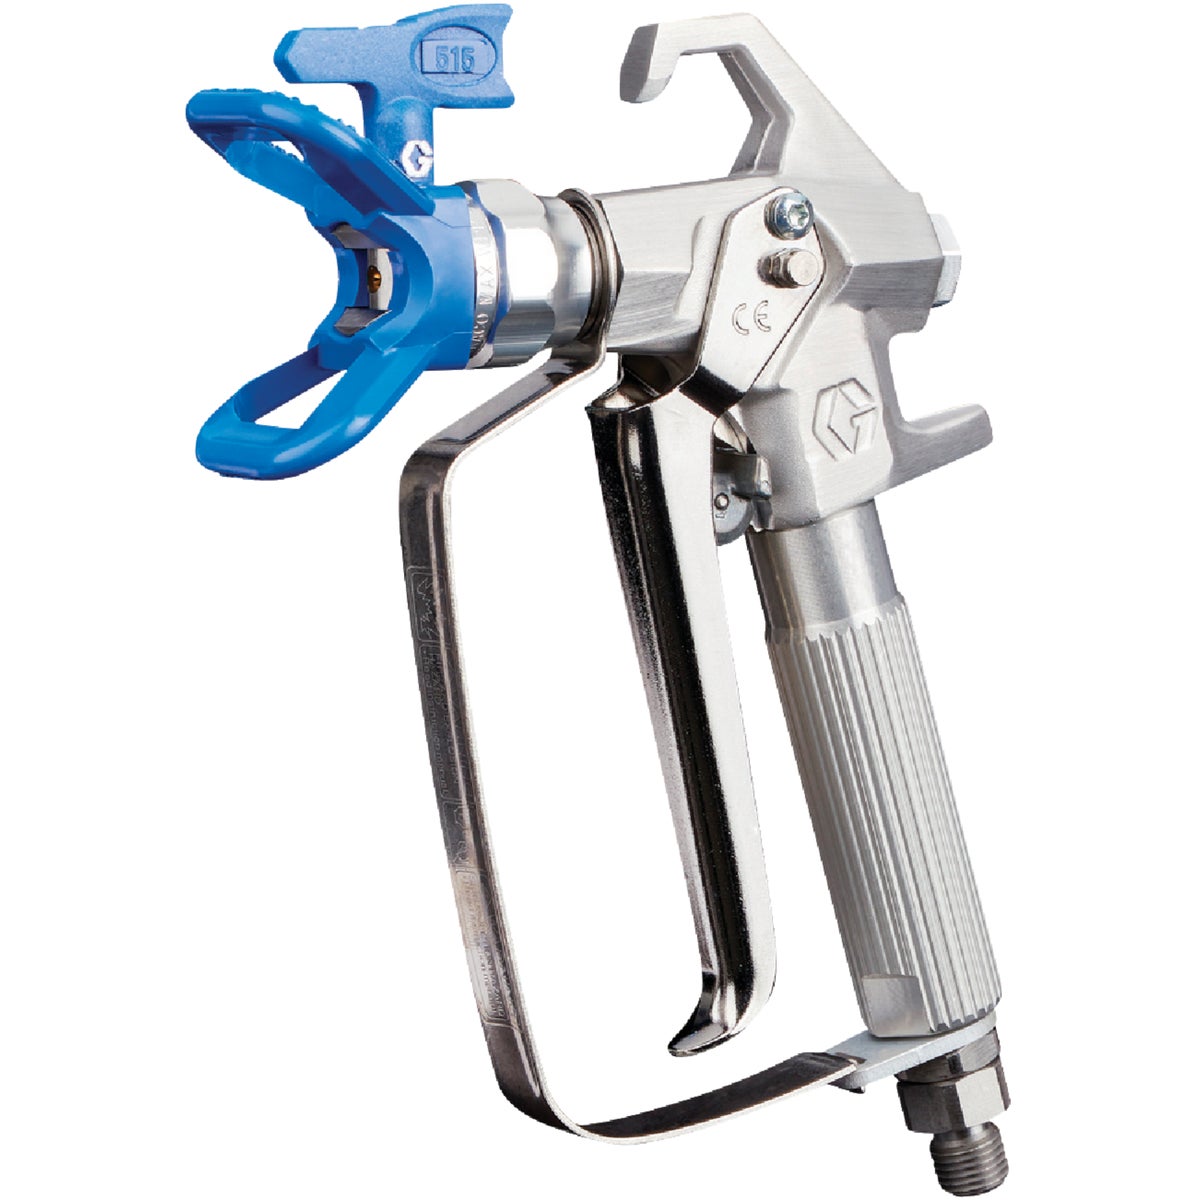 Graco Contractor FTx Airless Spray Gun with RAC X 515 SwitchTip